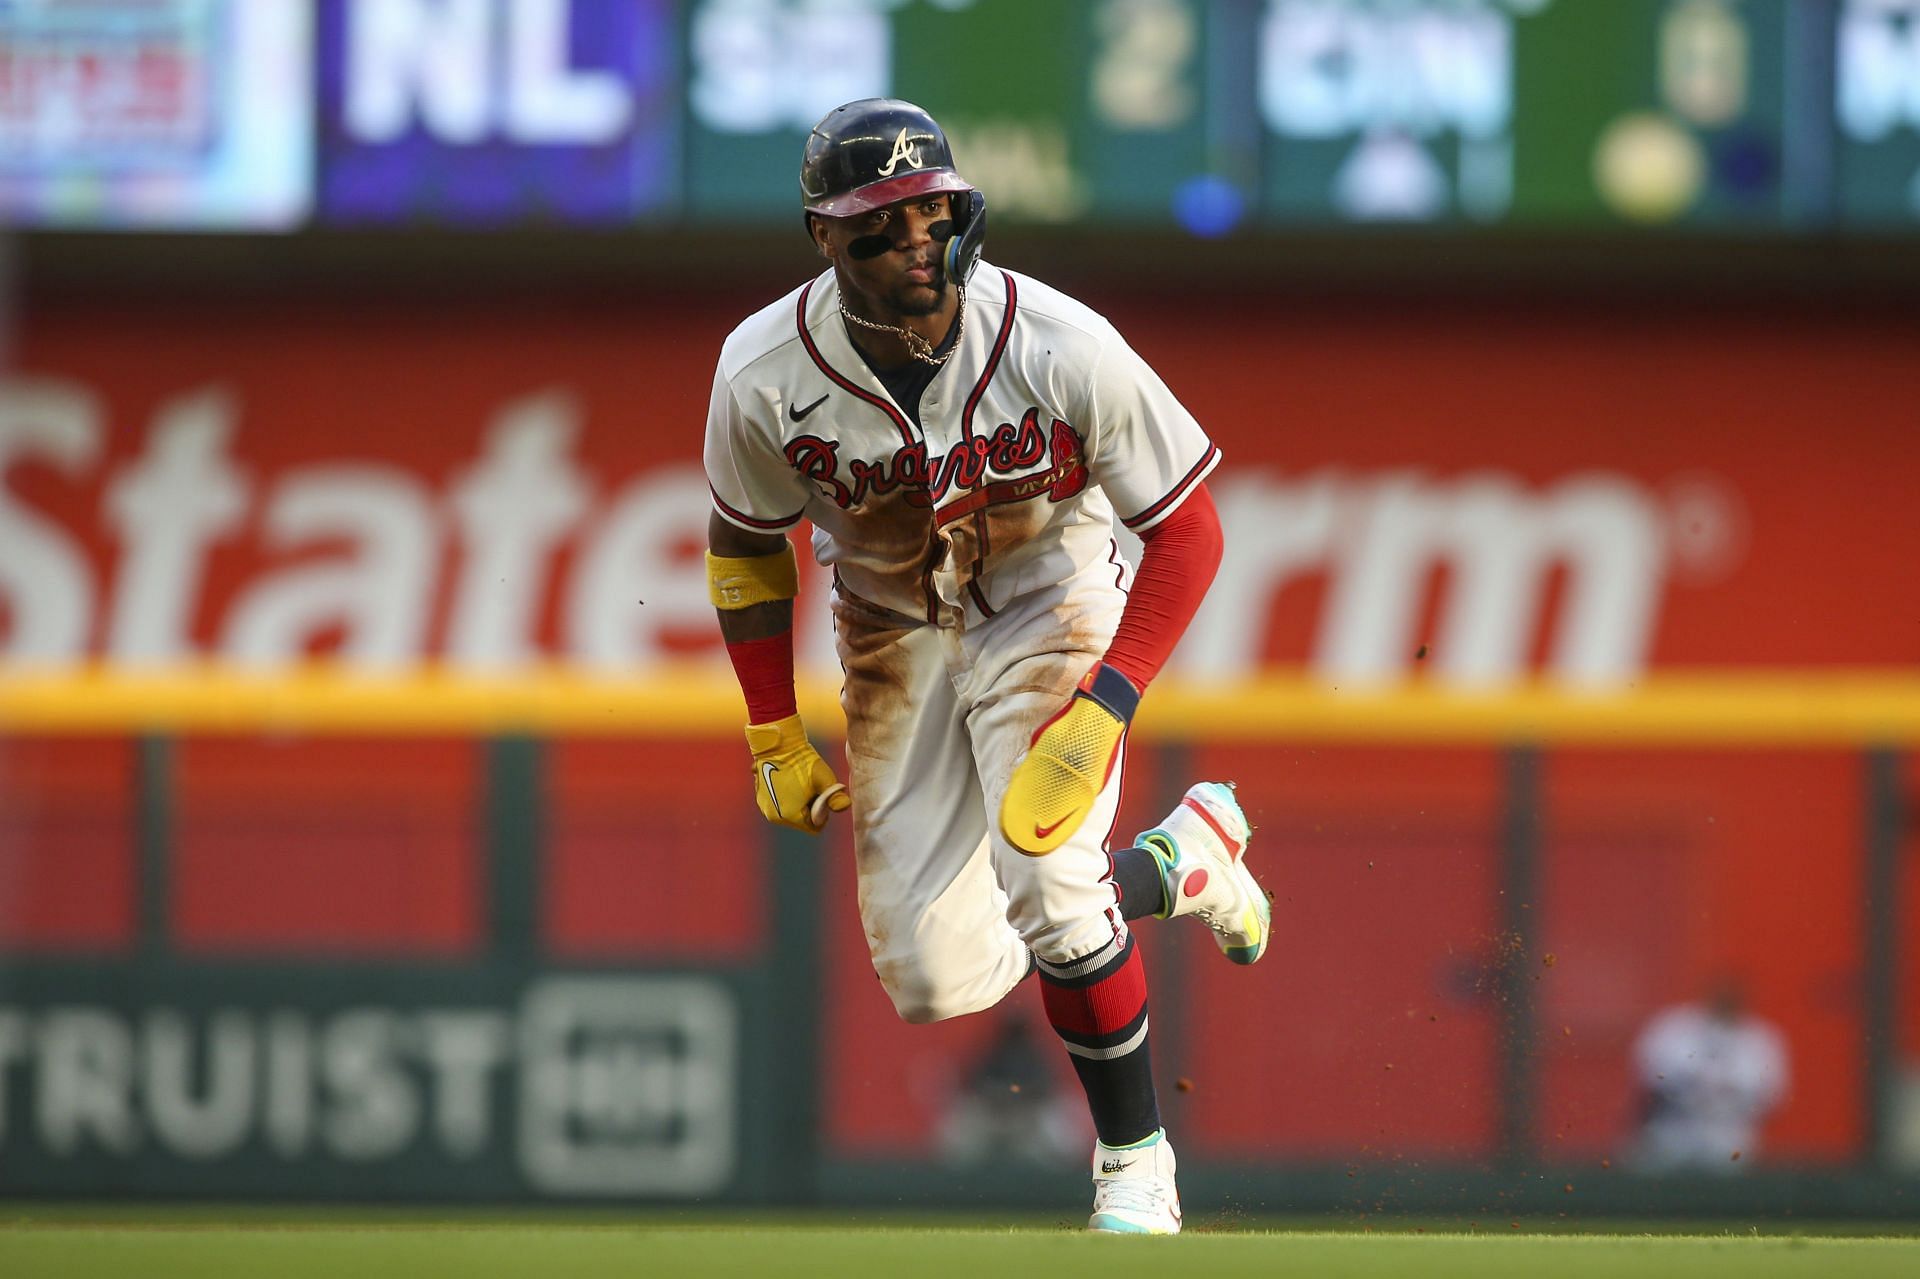 Braves outfielder Ronald Acuna Jr. received some of the most votes